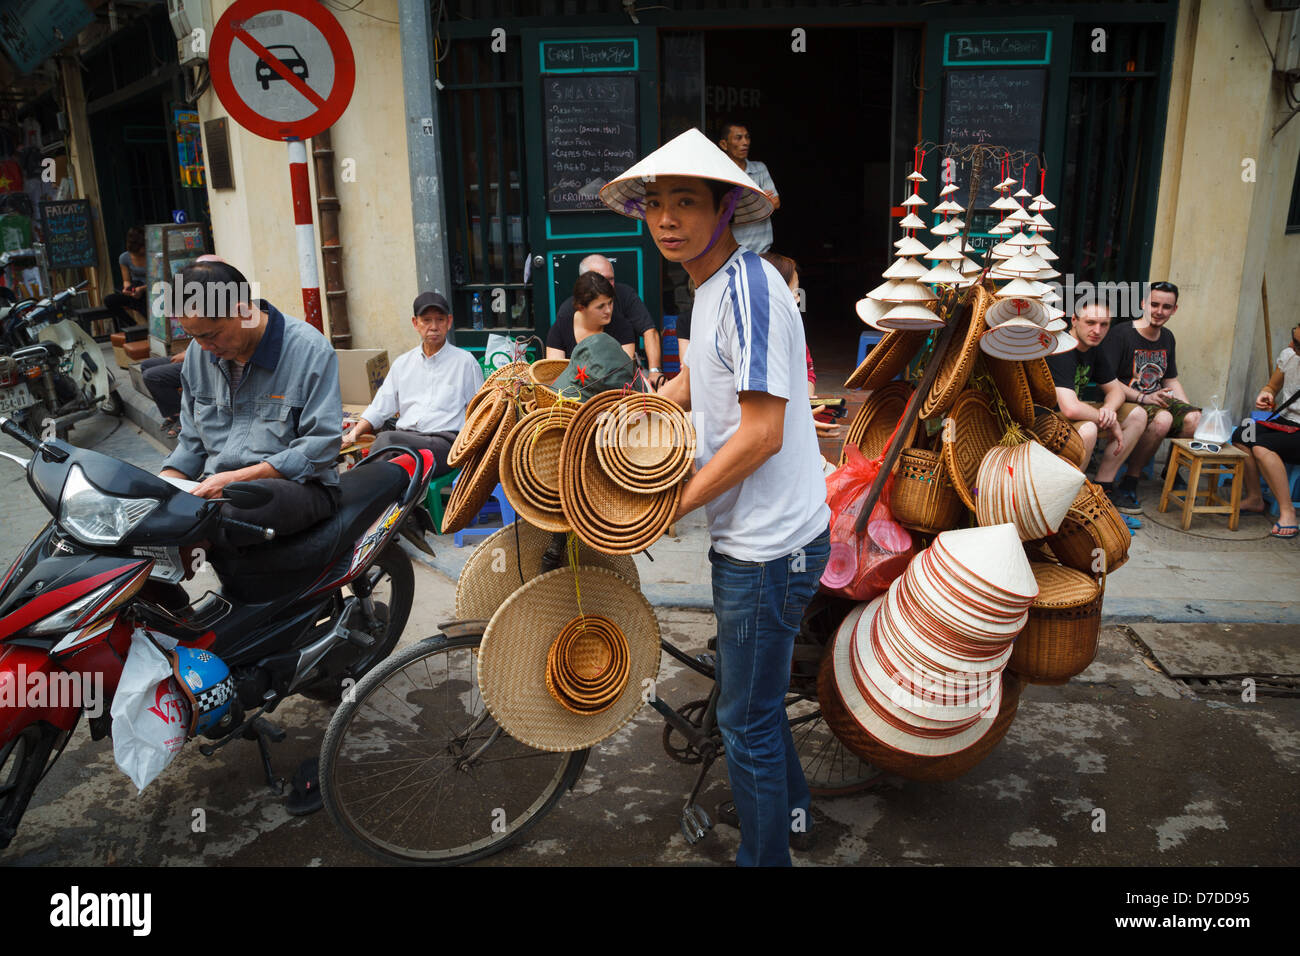 A man selling rice hats and baskets from his bicycle in the Old Quarter, Hanoi. Stock Photo